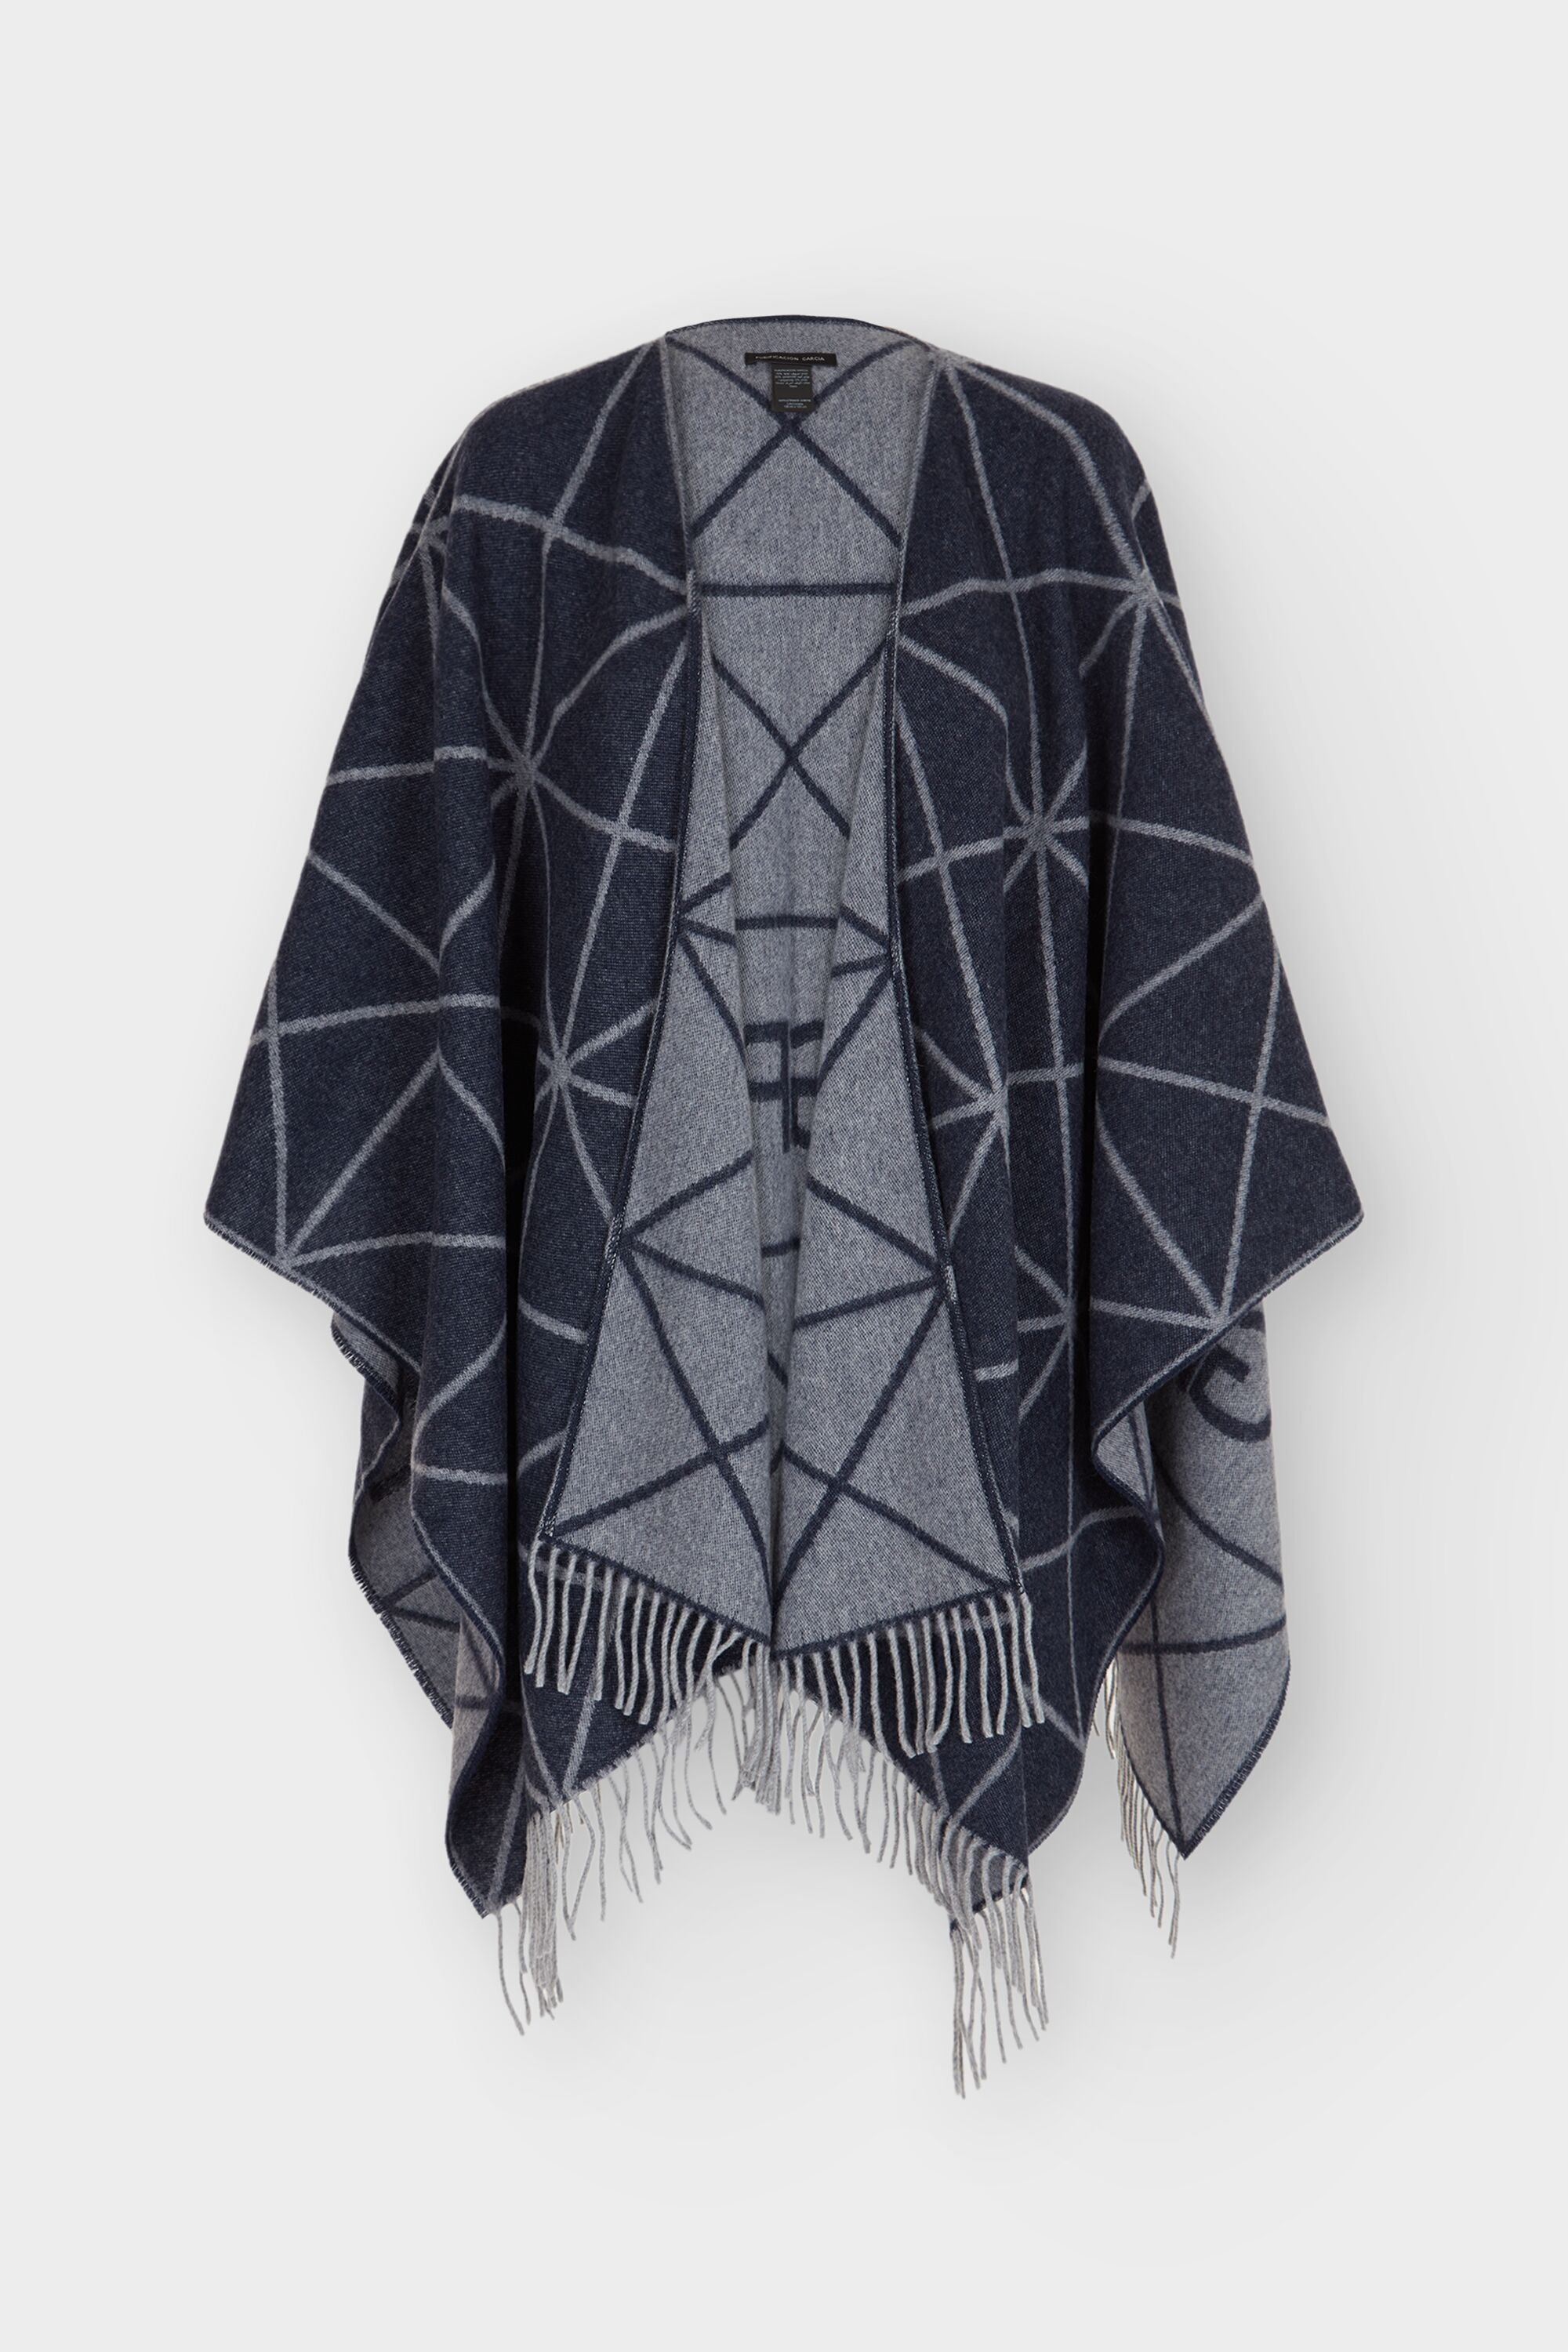 Origami wool reversible poncho